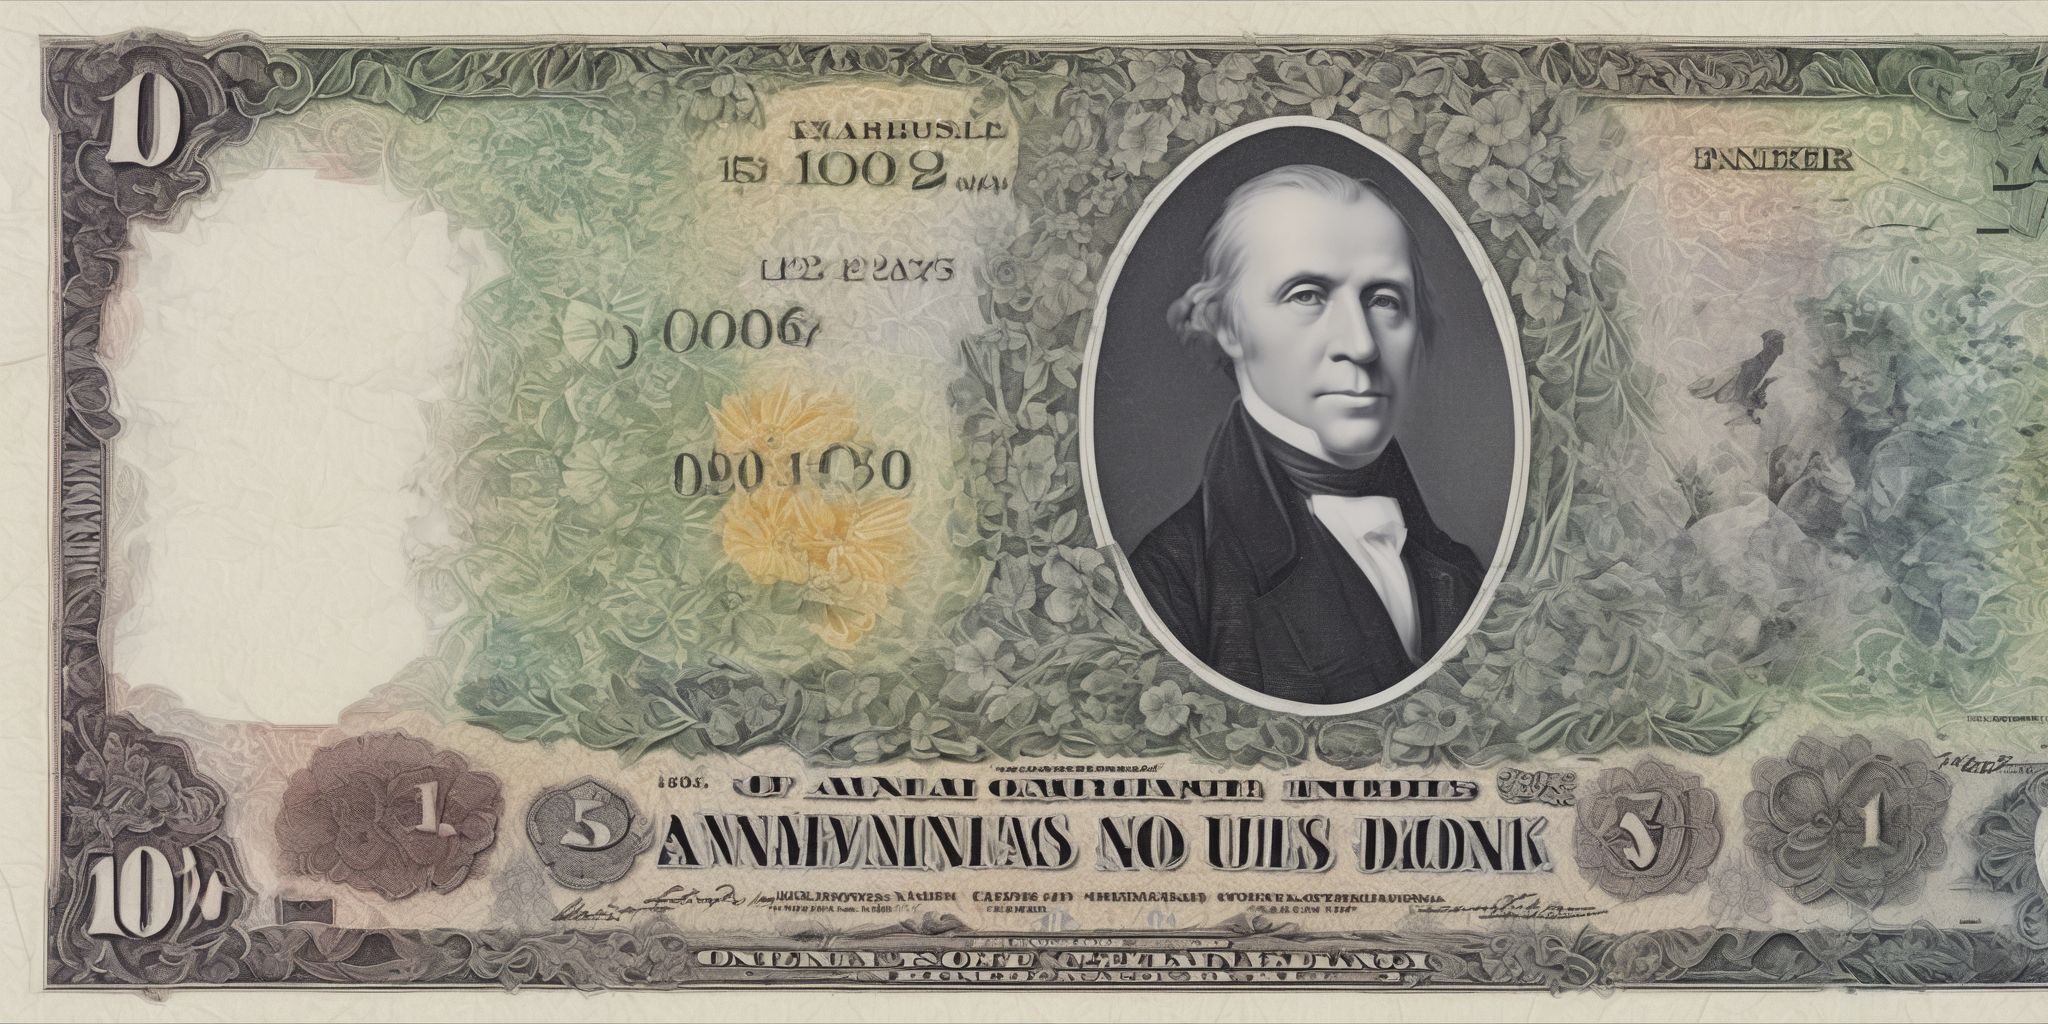 Banknote  in realistic, photographic style